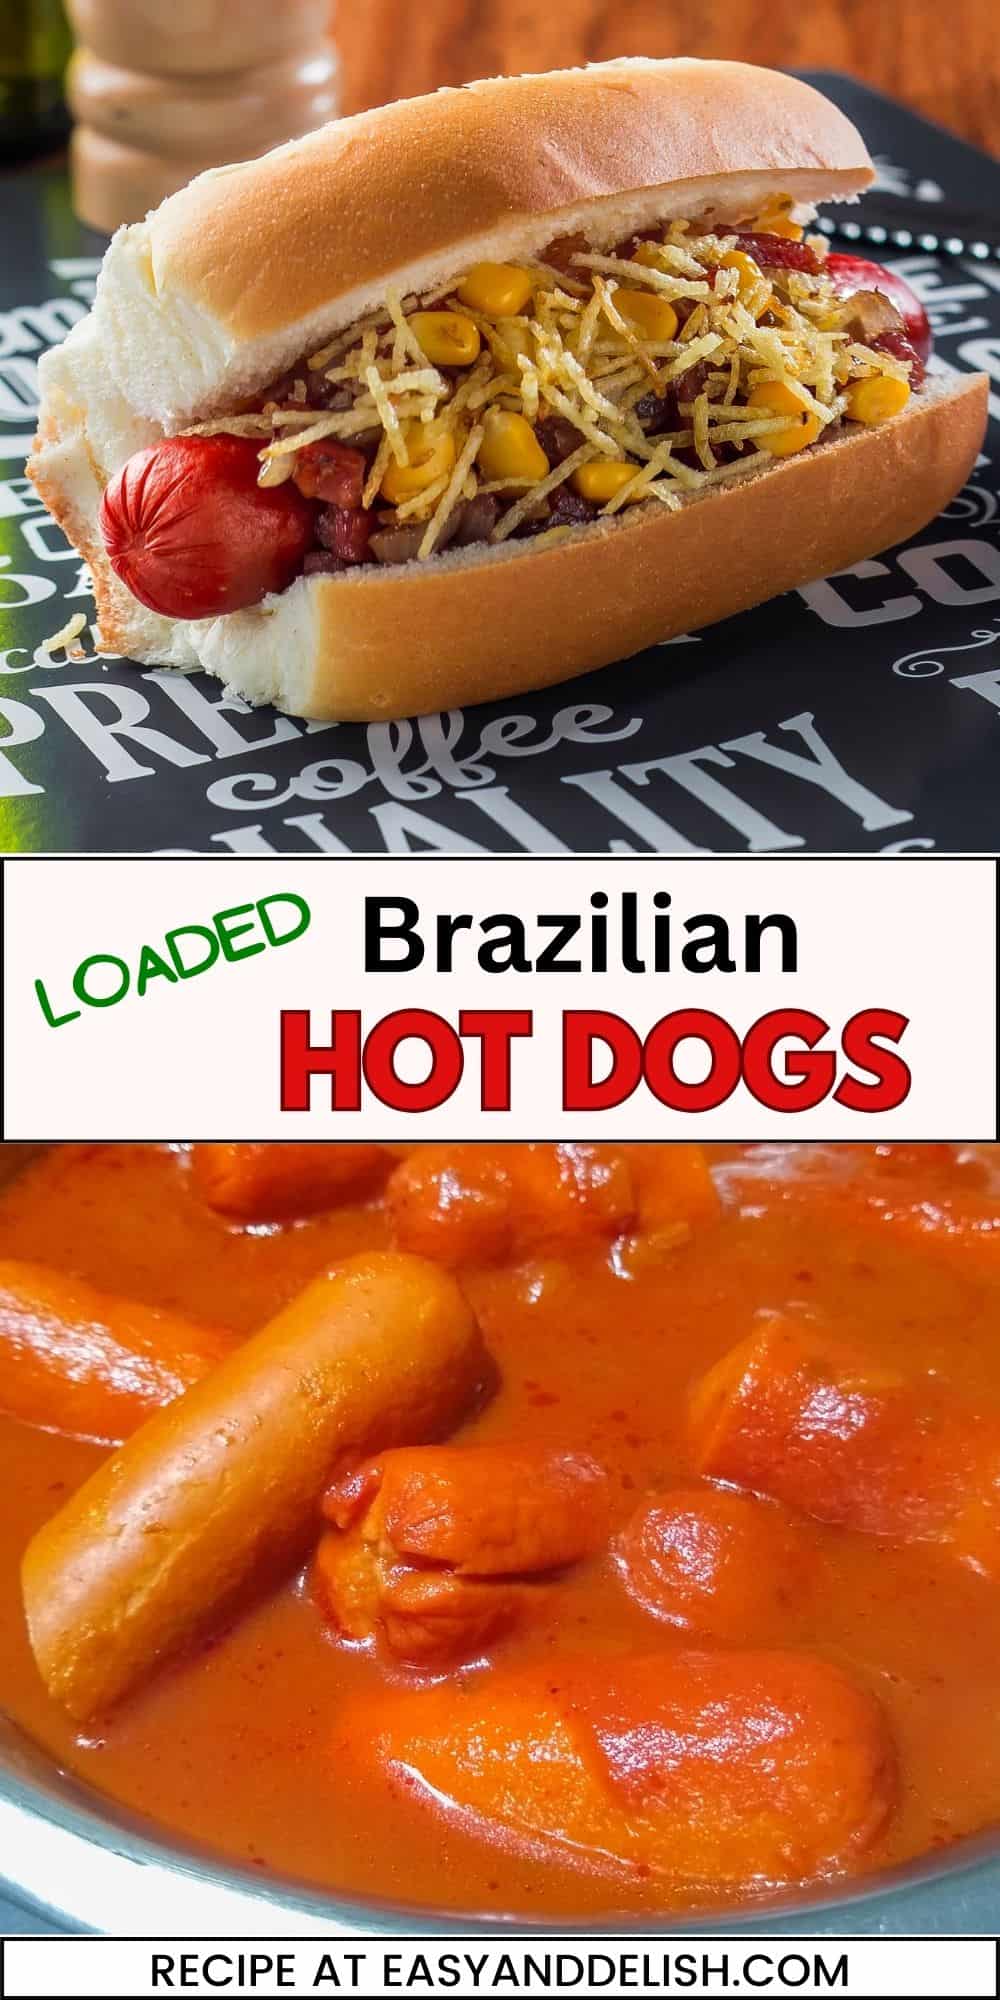 Collage image of a loaded hot dog (upper image) and a pan of sausage links in tomato sauce (bottom).